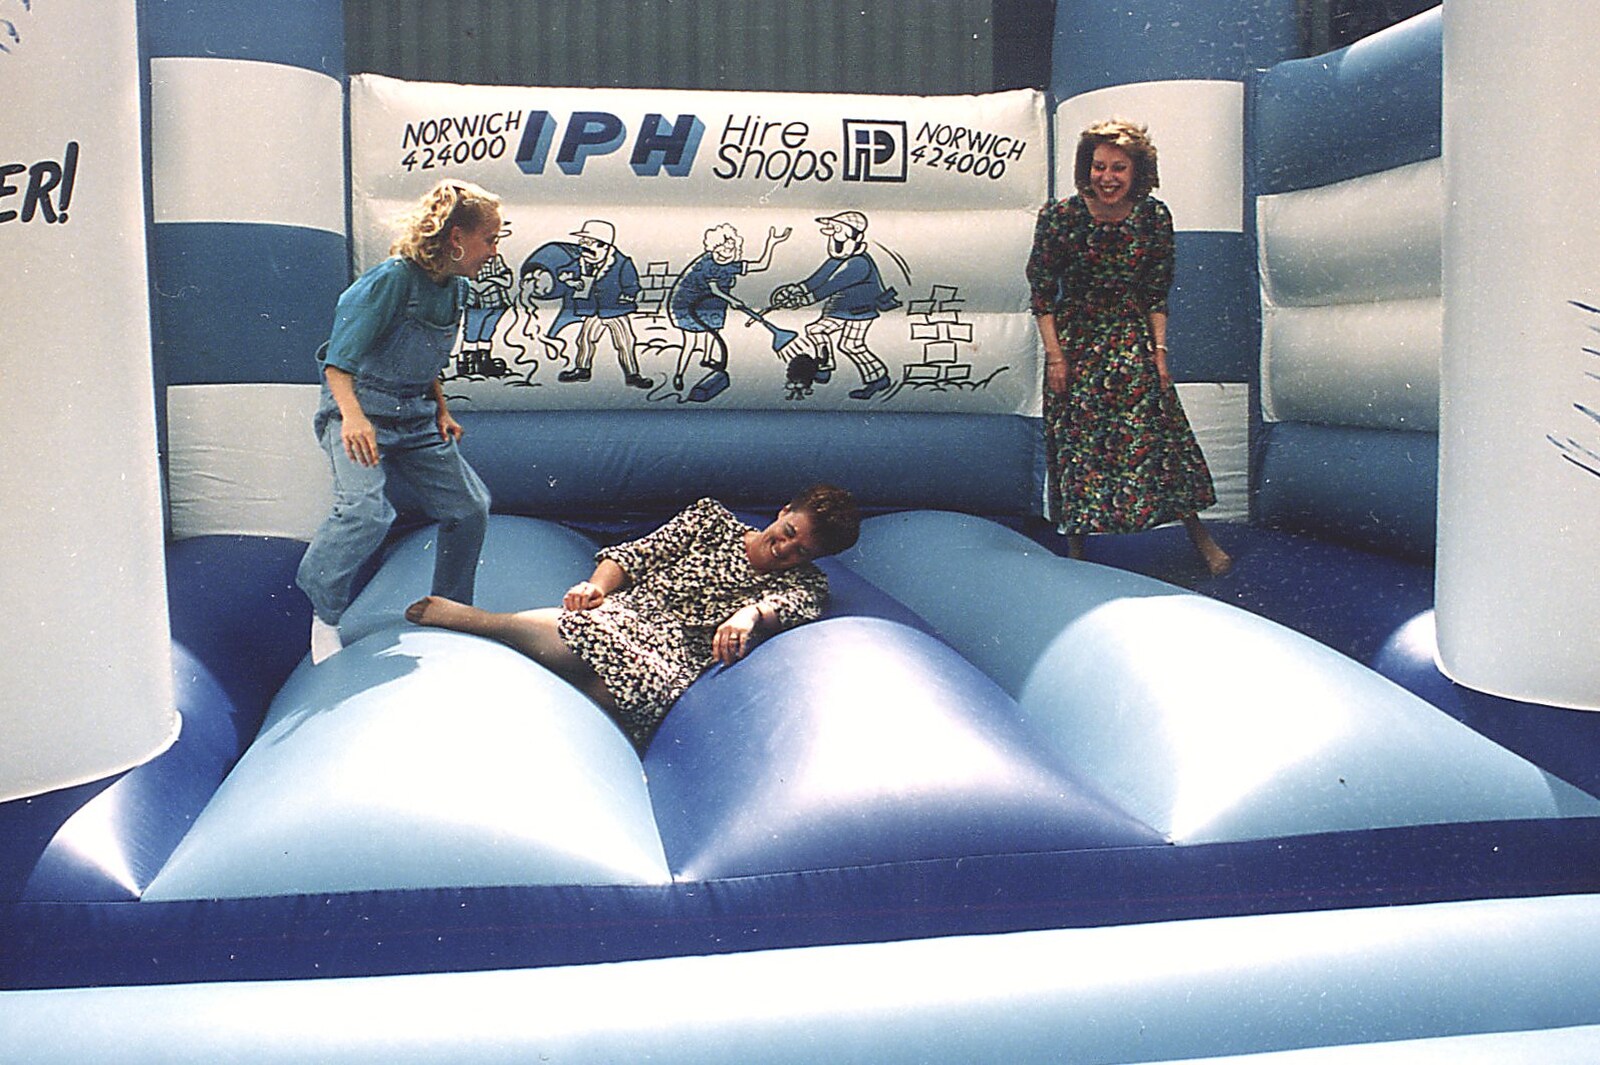 BPCC Anglia Web Open Day, Diss, Norfolk - 23rd June 1990: Linda and Jackie bounce around like loons